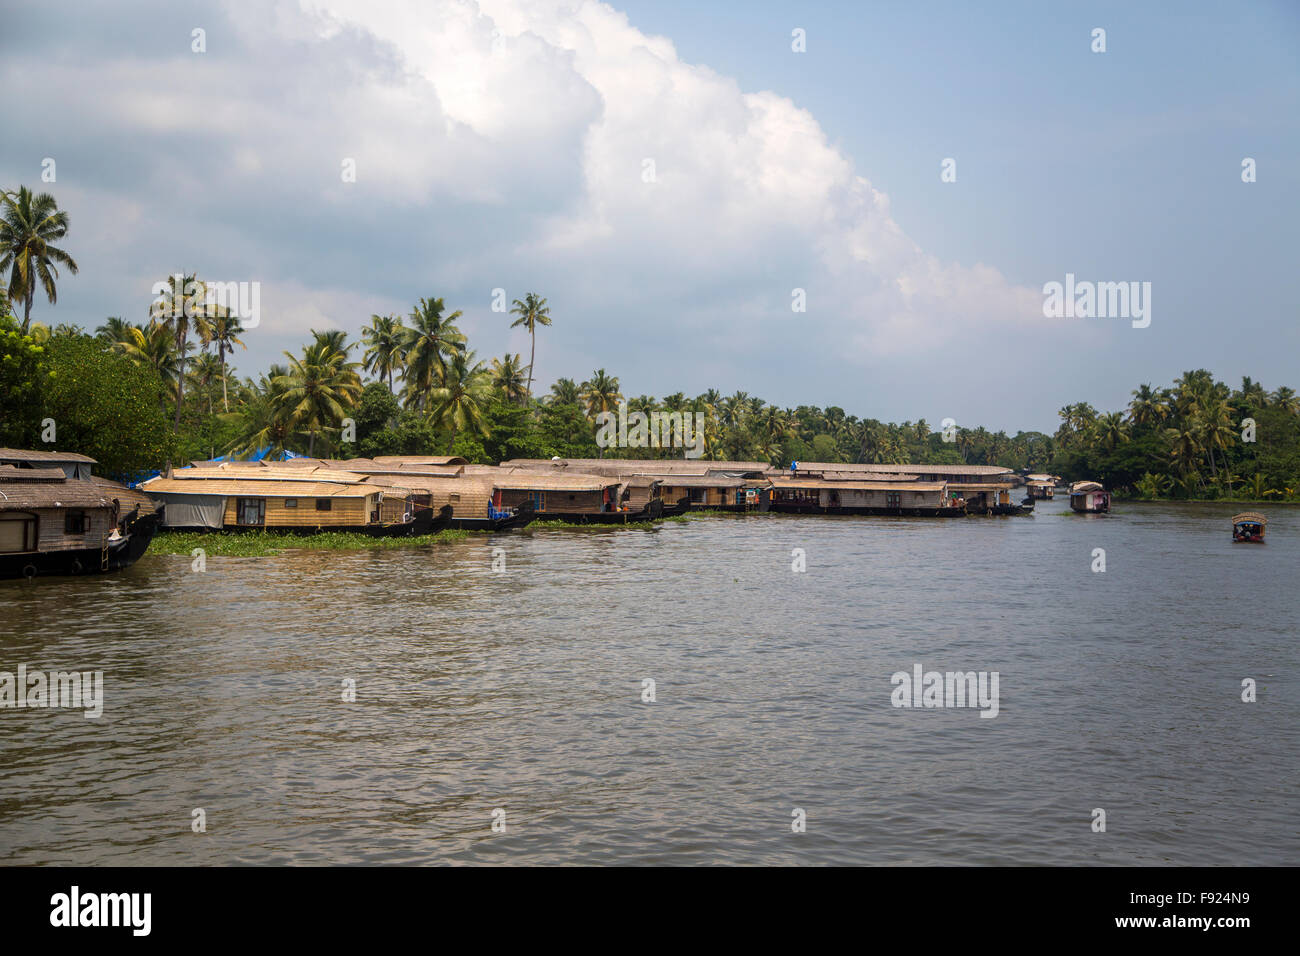 Backwaters in Kerala, India. The backwaters are an extensive network of 41 west flowing interlocking rivers, lakes and canals th Stock Photo